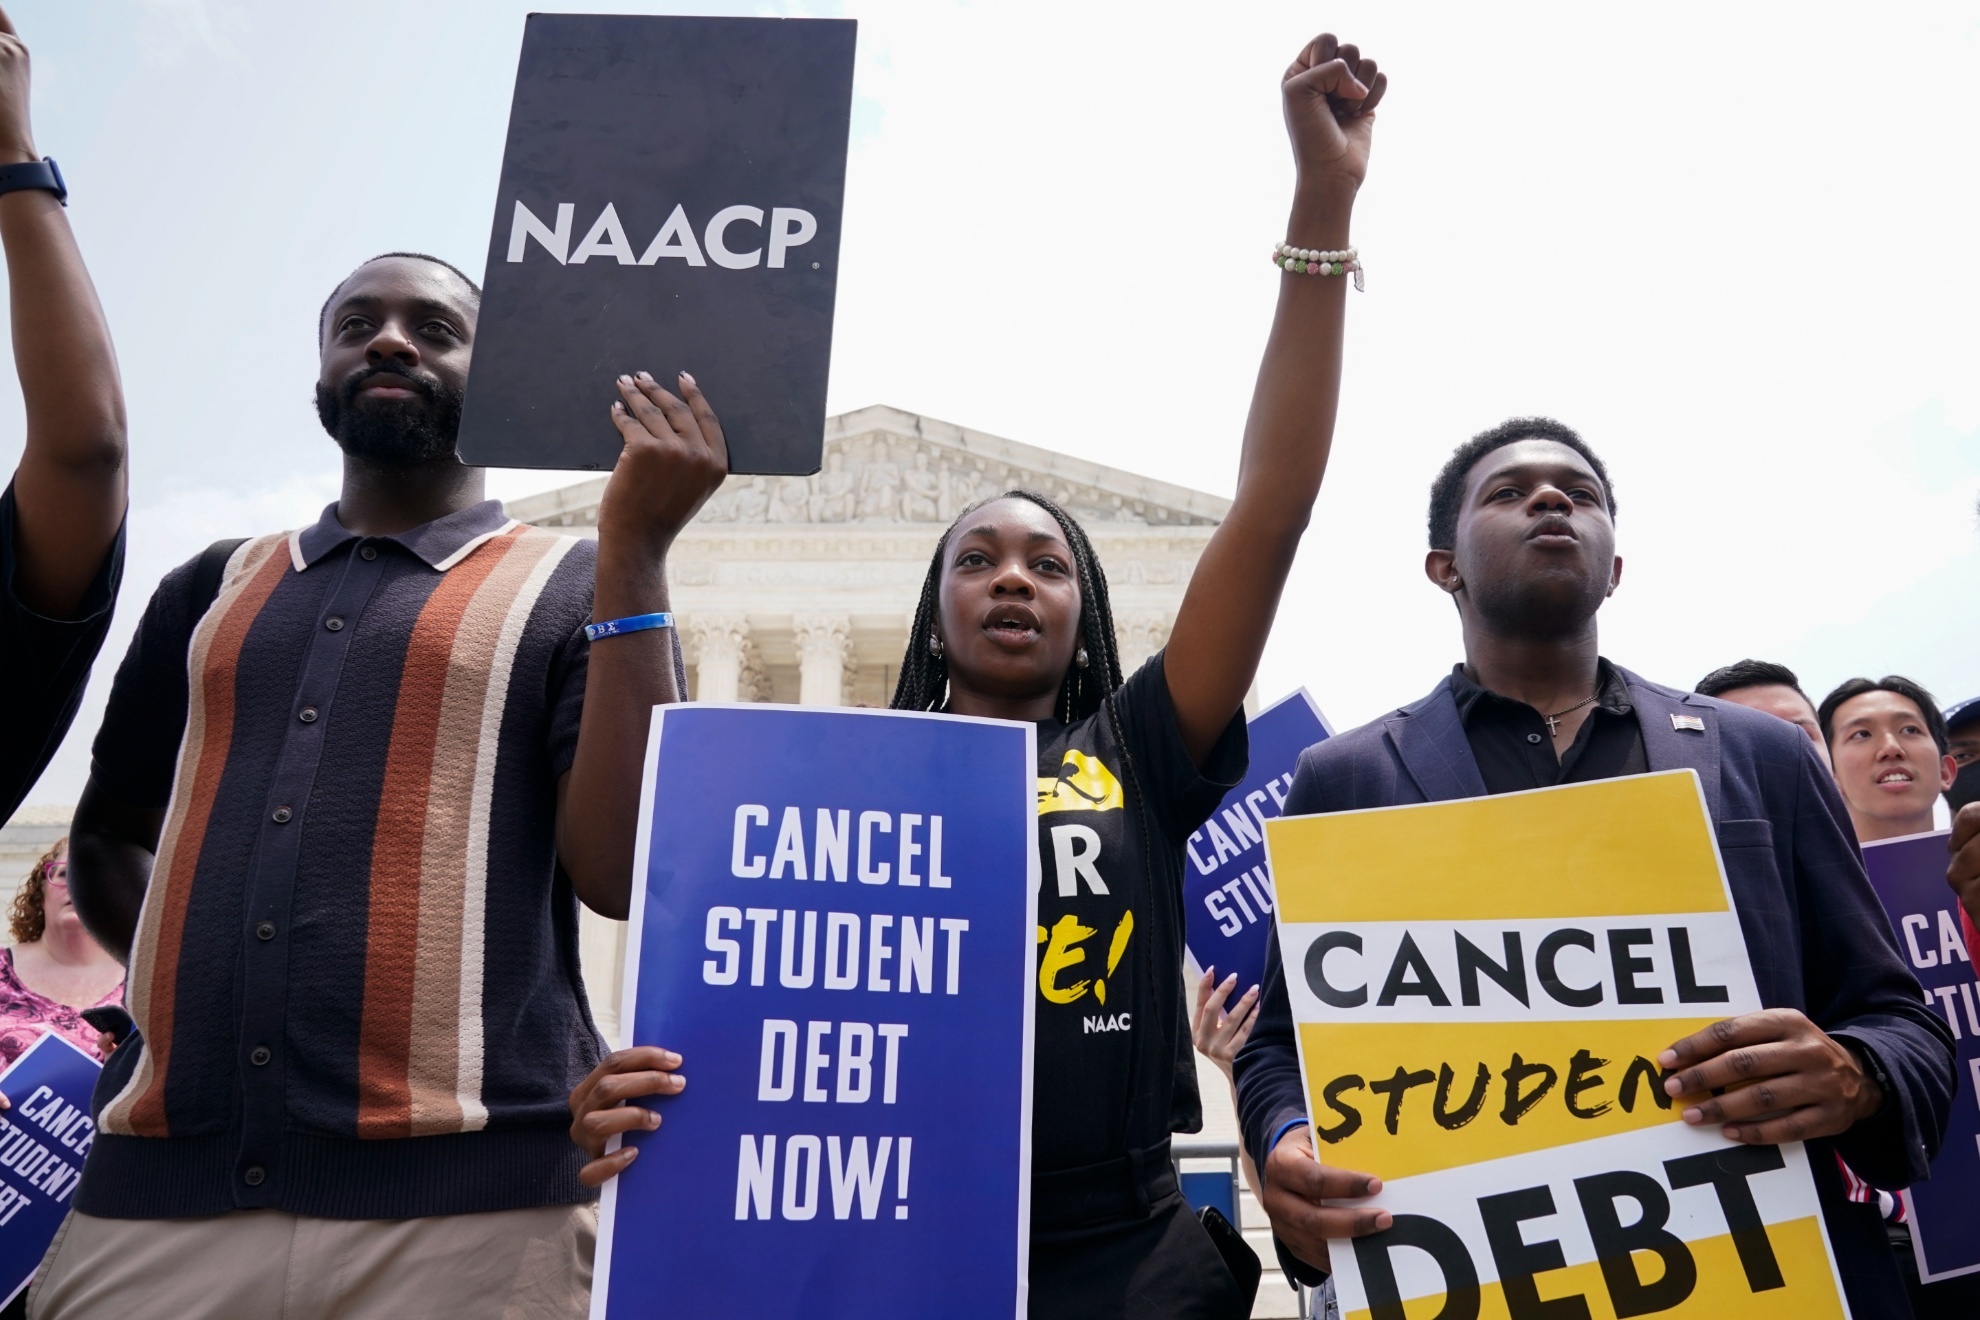 Protesters outside in Washington call for the cancellation of student debt.